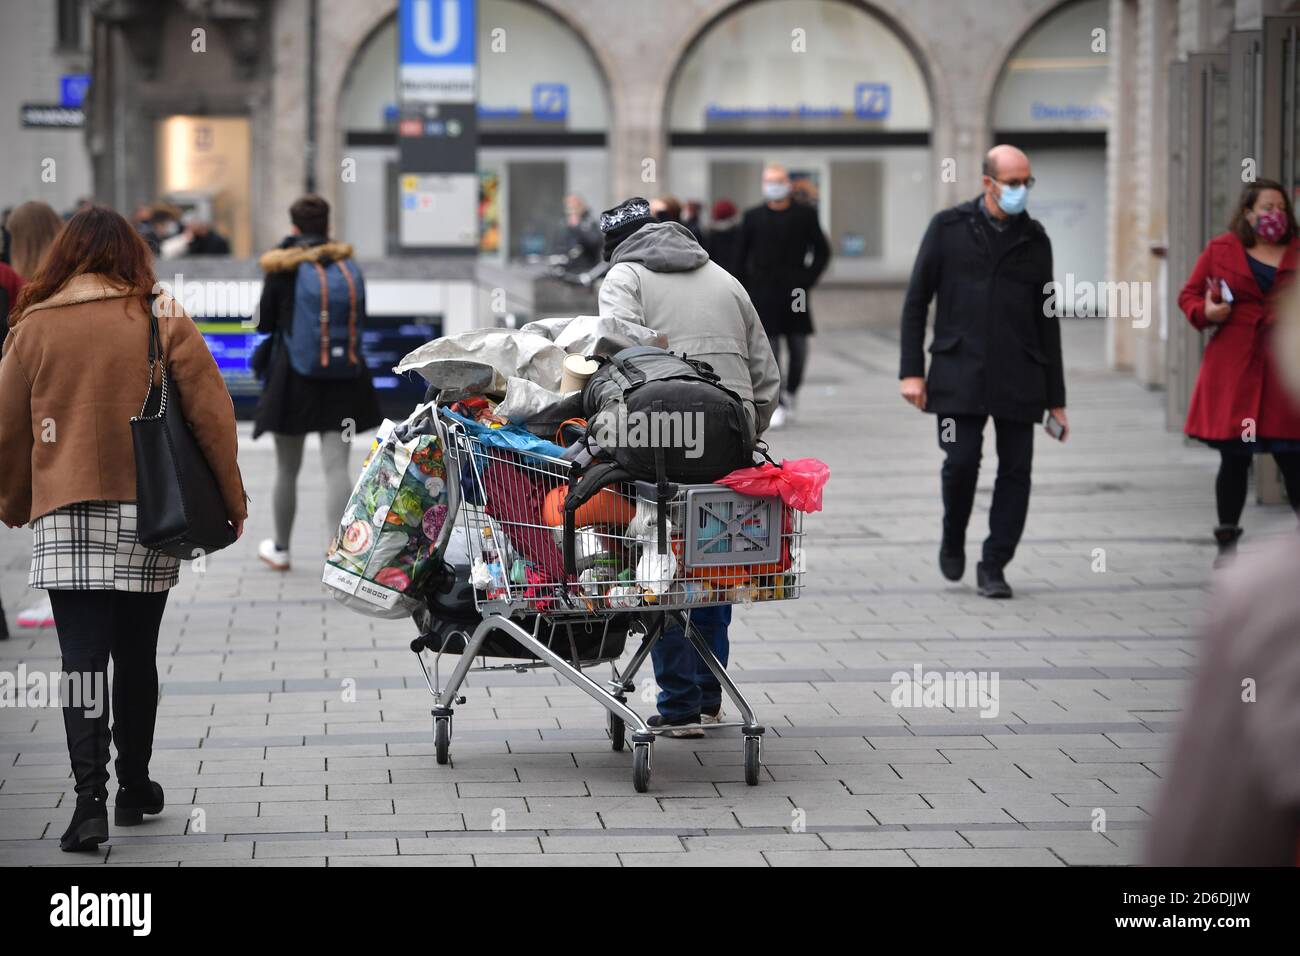 Ten years picture Prey Munich. 15th Oct, 2020. Public life in times of the coronavirus pandemic on  October 15, 2020 in Munich. A homeless, poor, bum drives his belongings,  which are in a shopping cart, through